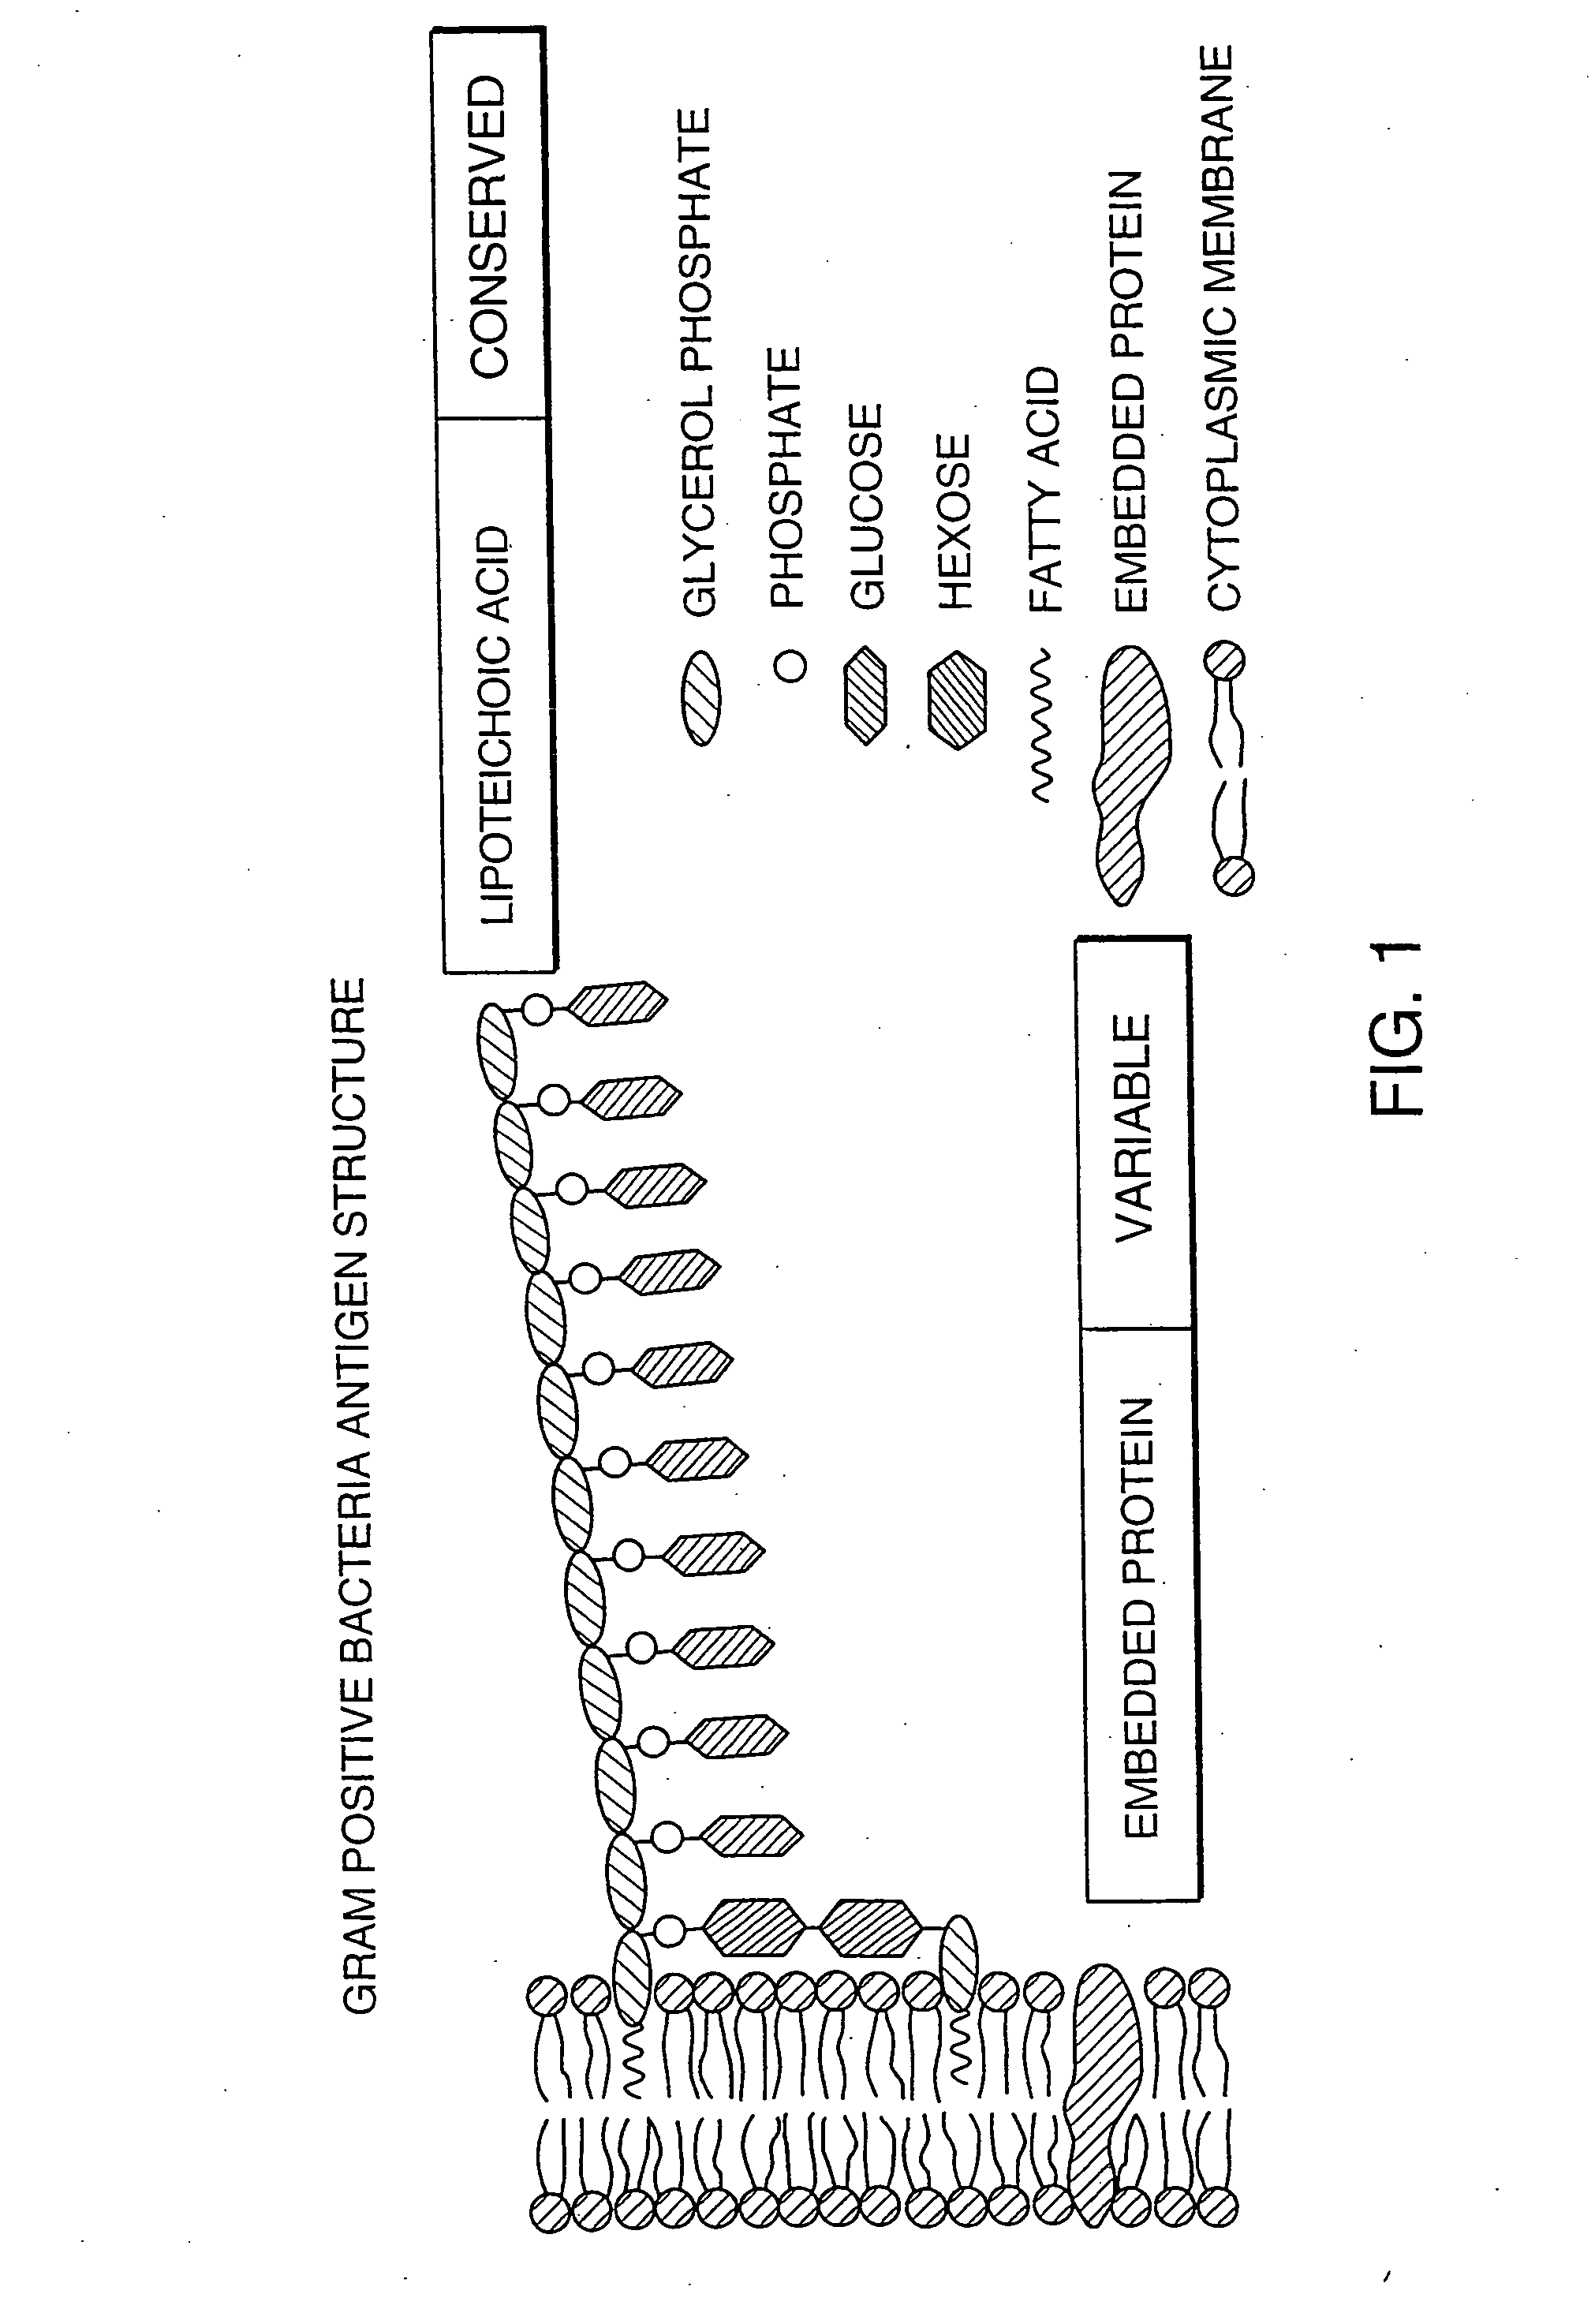 System for detecting bacteria in blood, blood products, and fluids of tissues